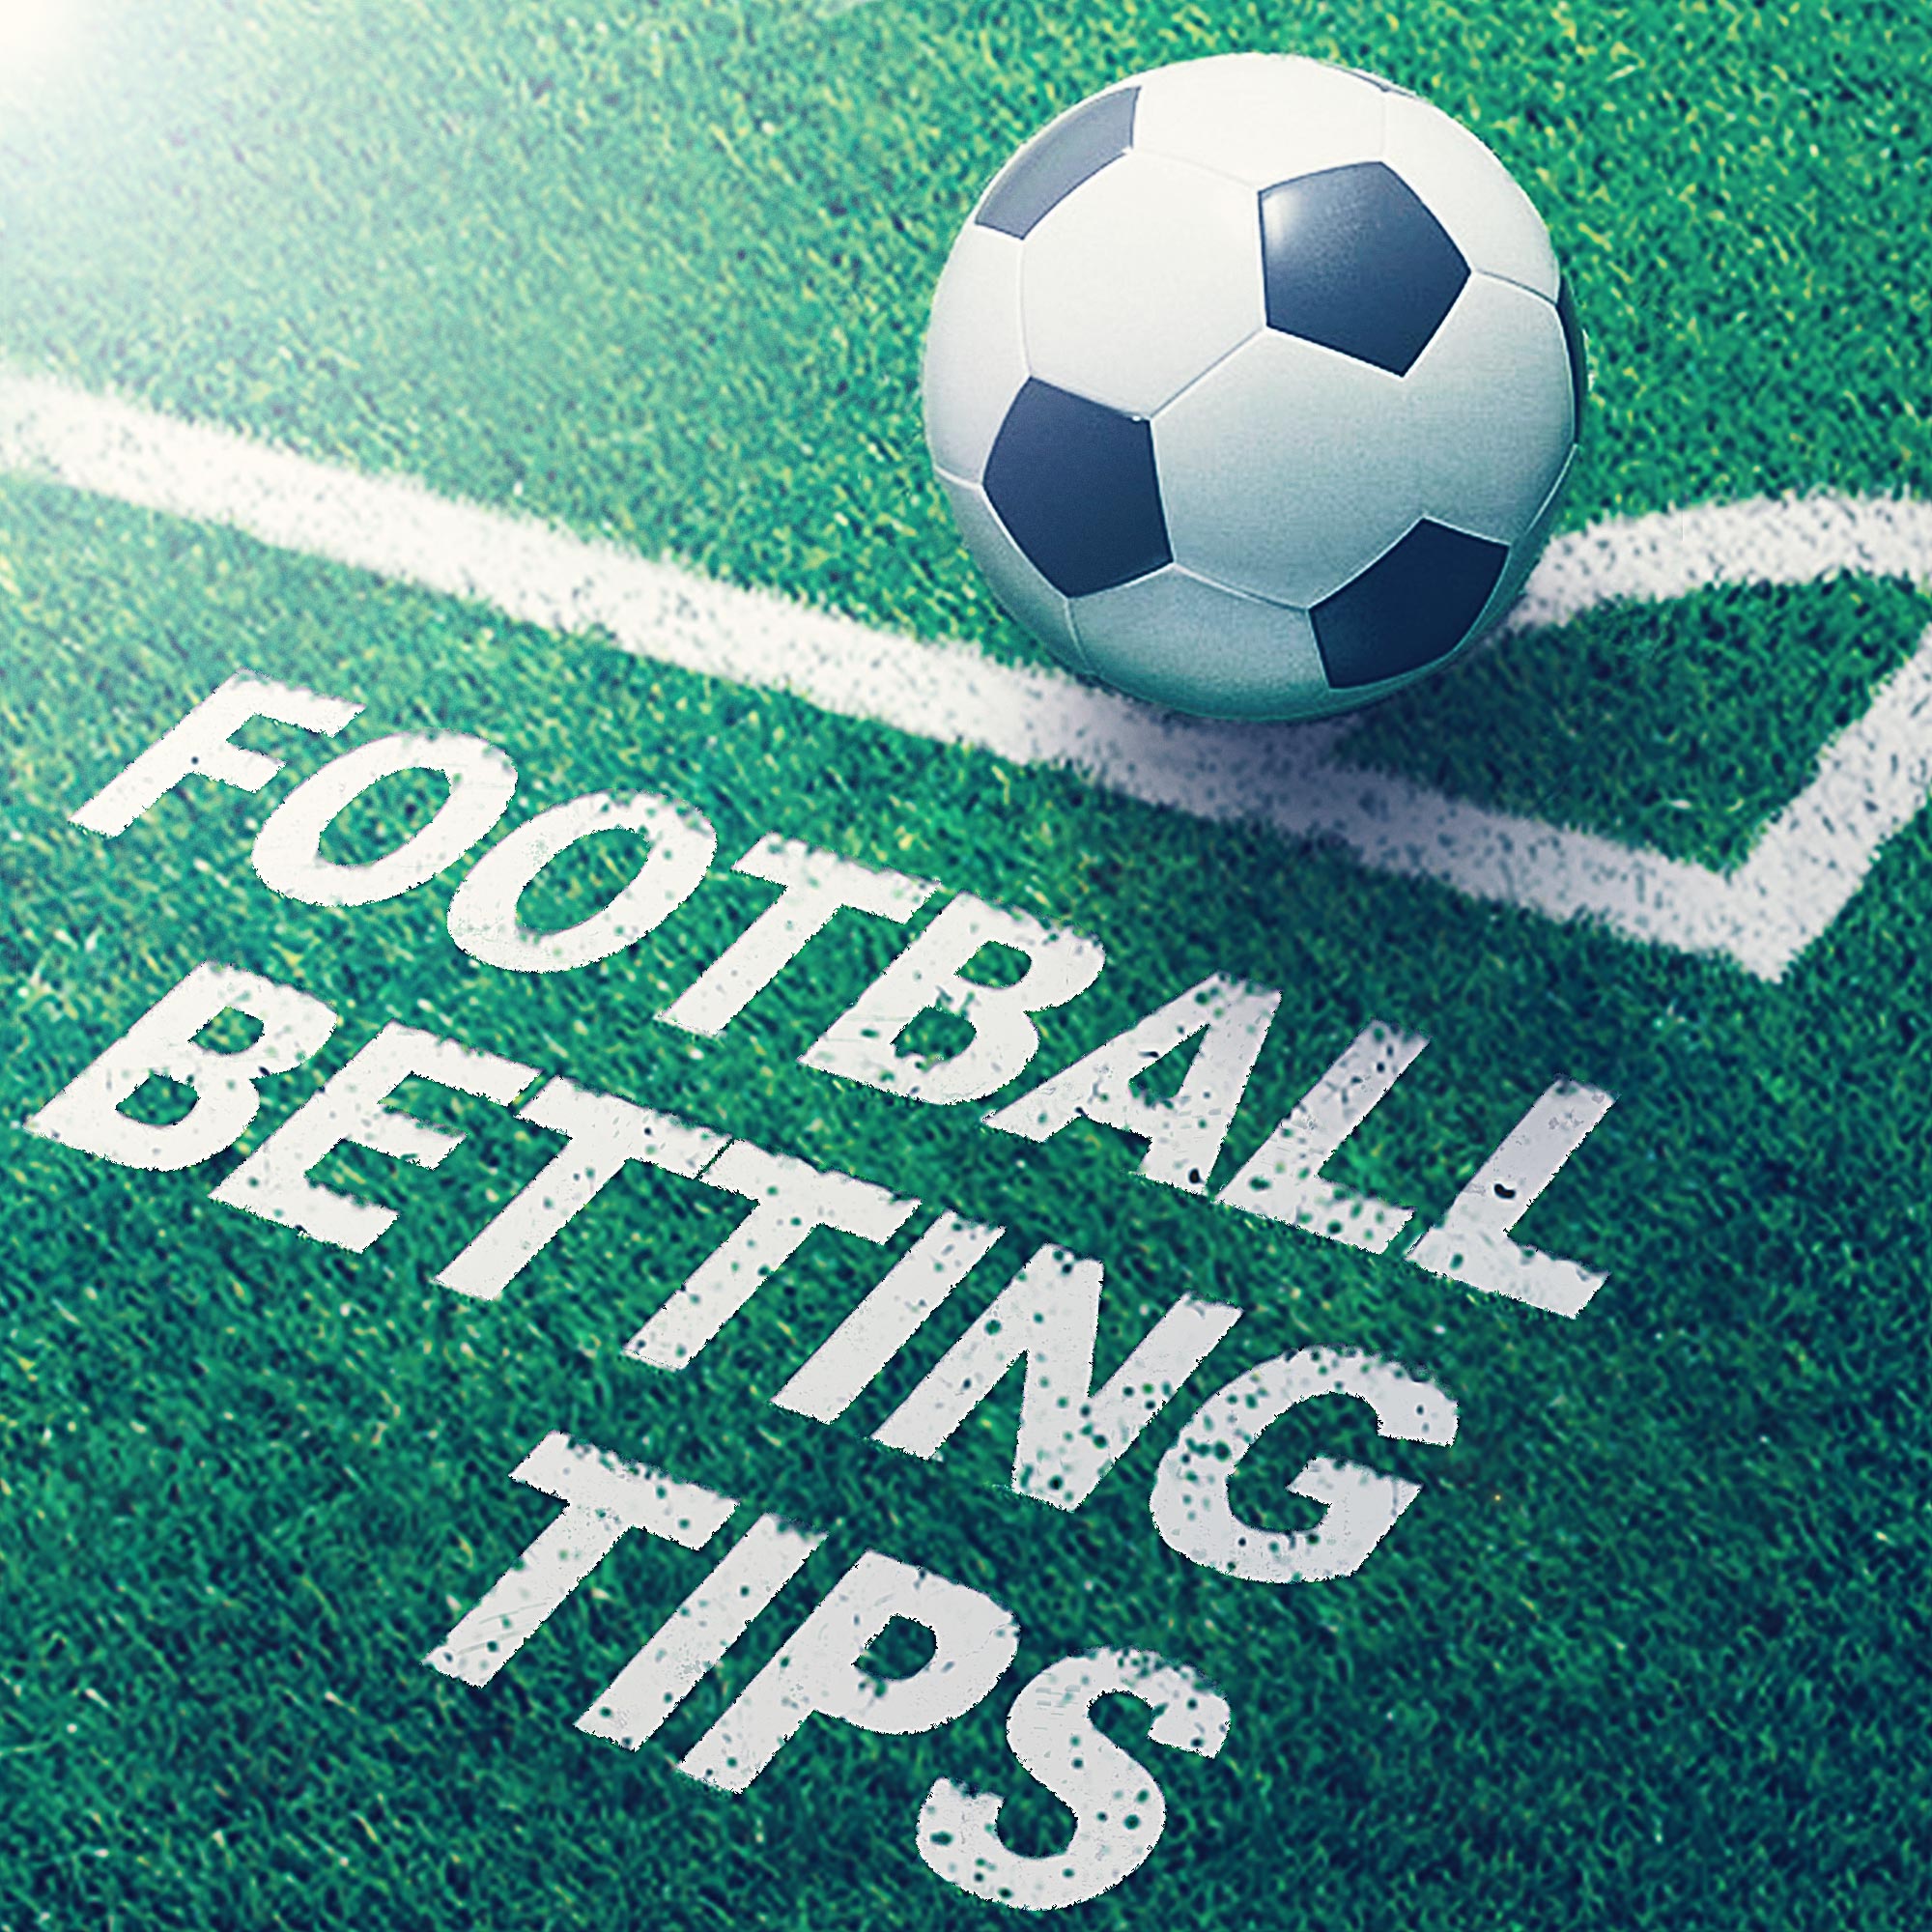 The Ultimate Betting Guide for Novices and Pros